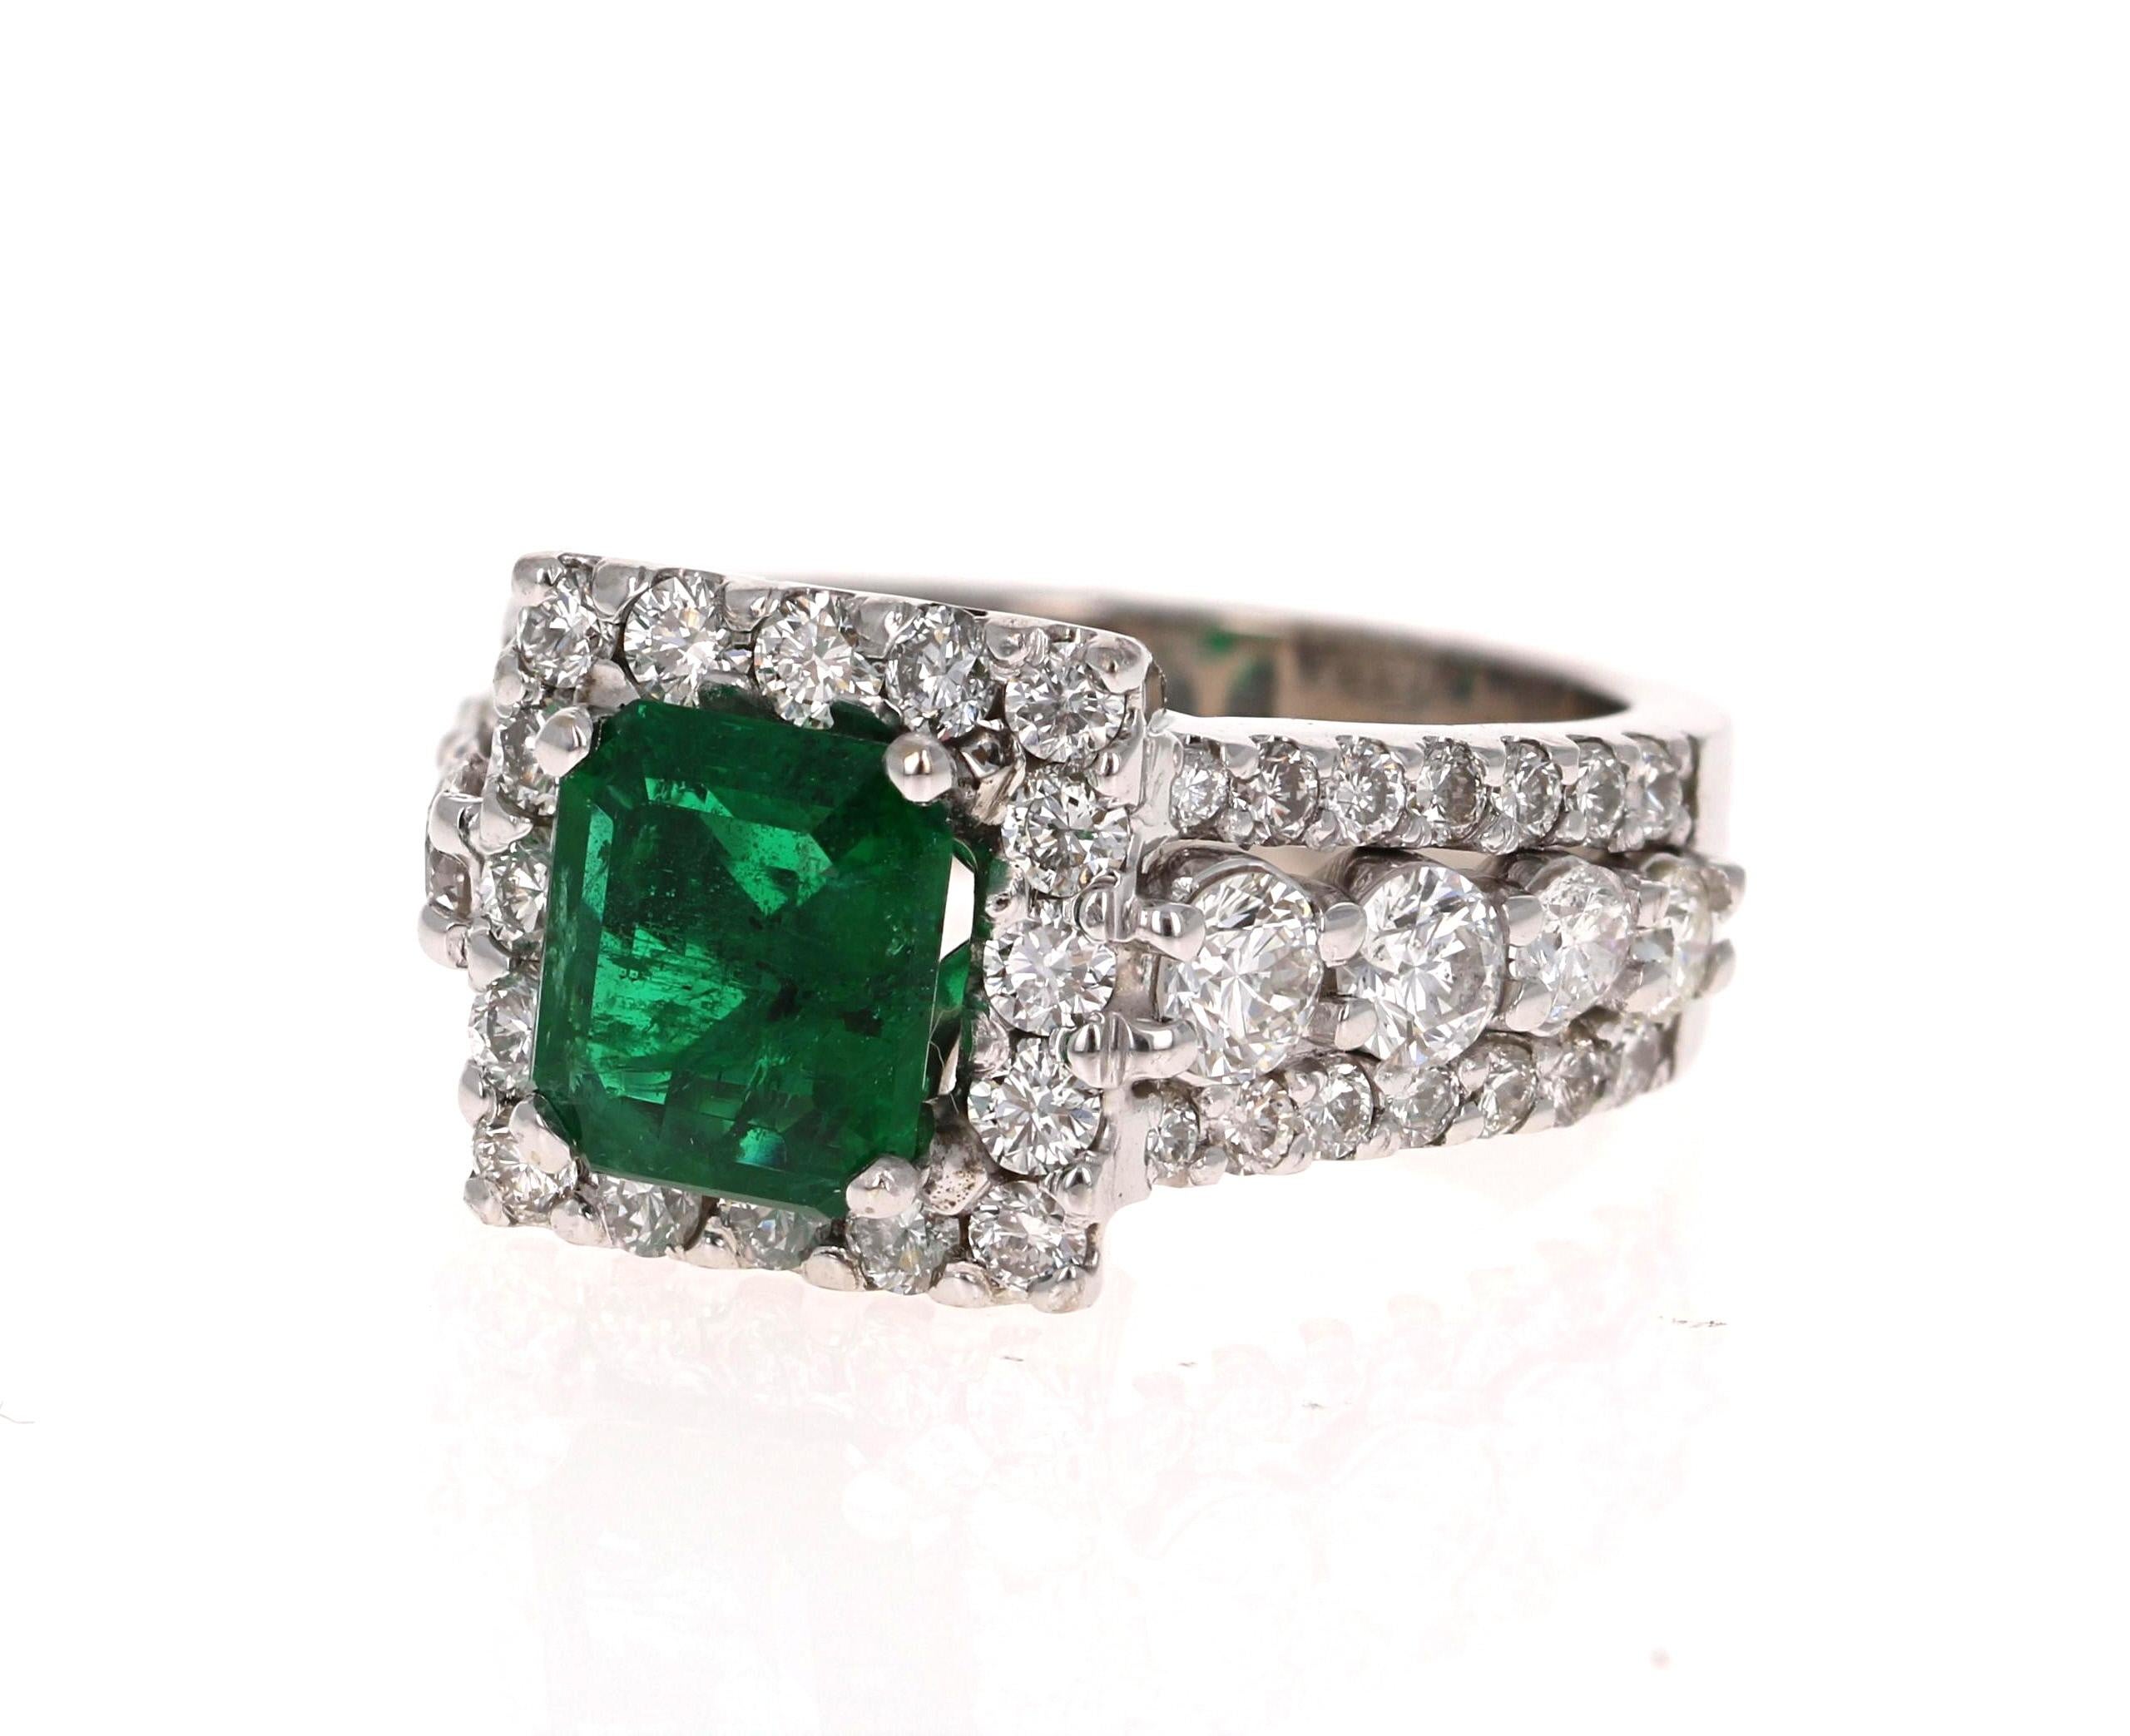 A beautiful modern classic setting holding a magnificent natural Emerald that weighs 1.72 Carats. The emerald is a natural green beryl with an emerald-step cut and the measurements are approximately 8 mm x 7 mm. This gorgeous ring also has 52 Round